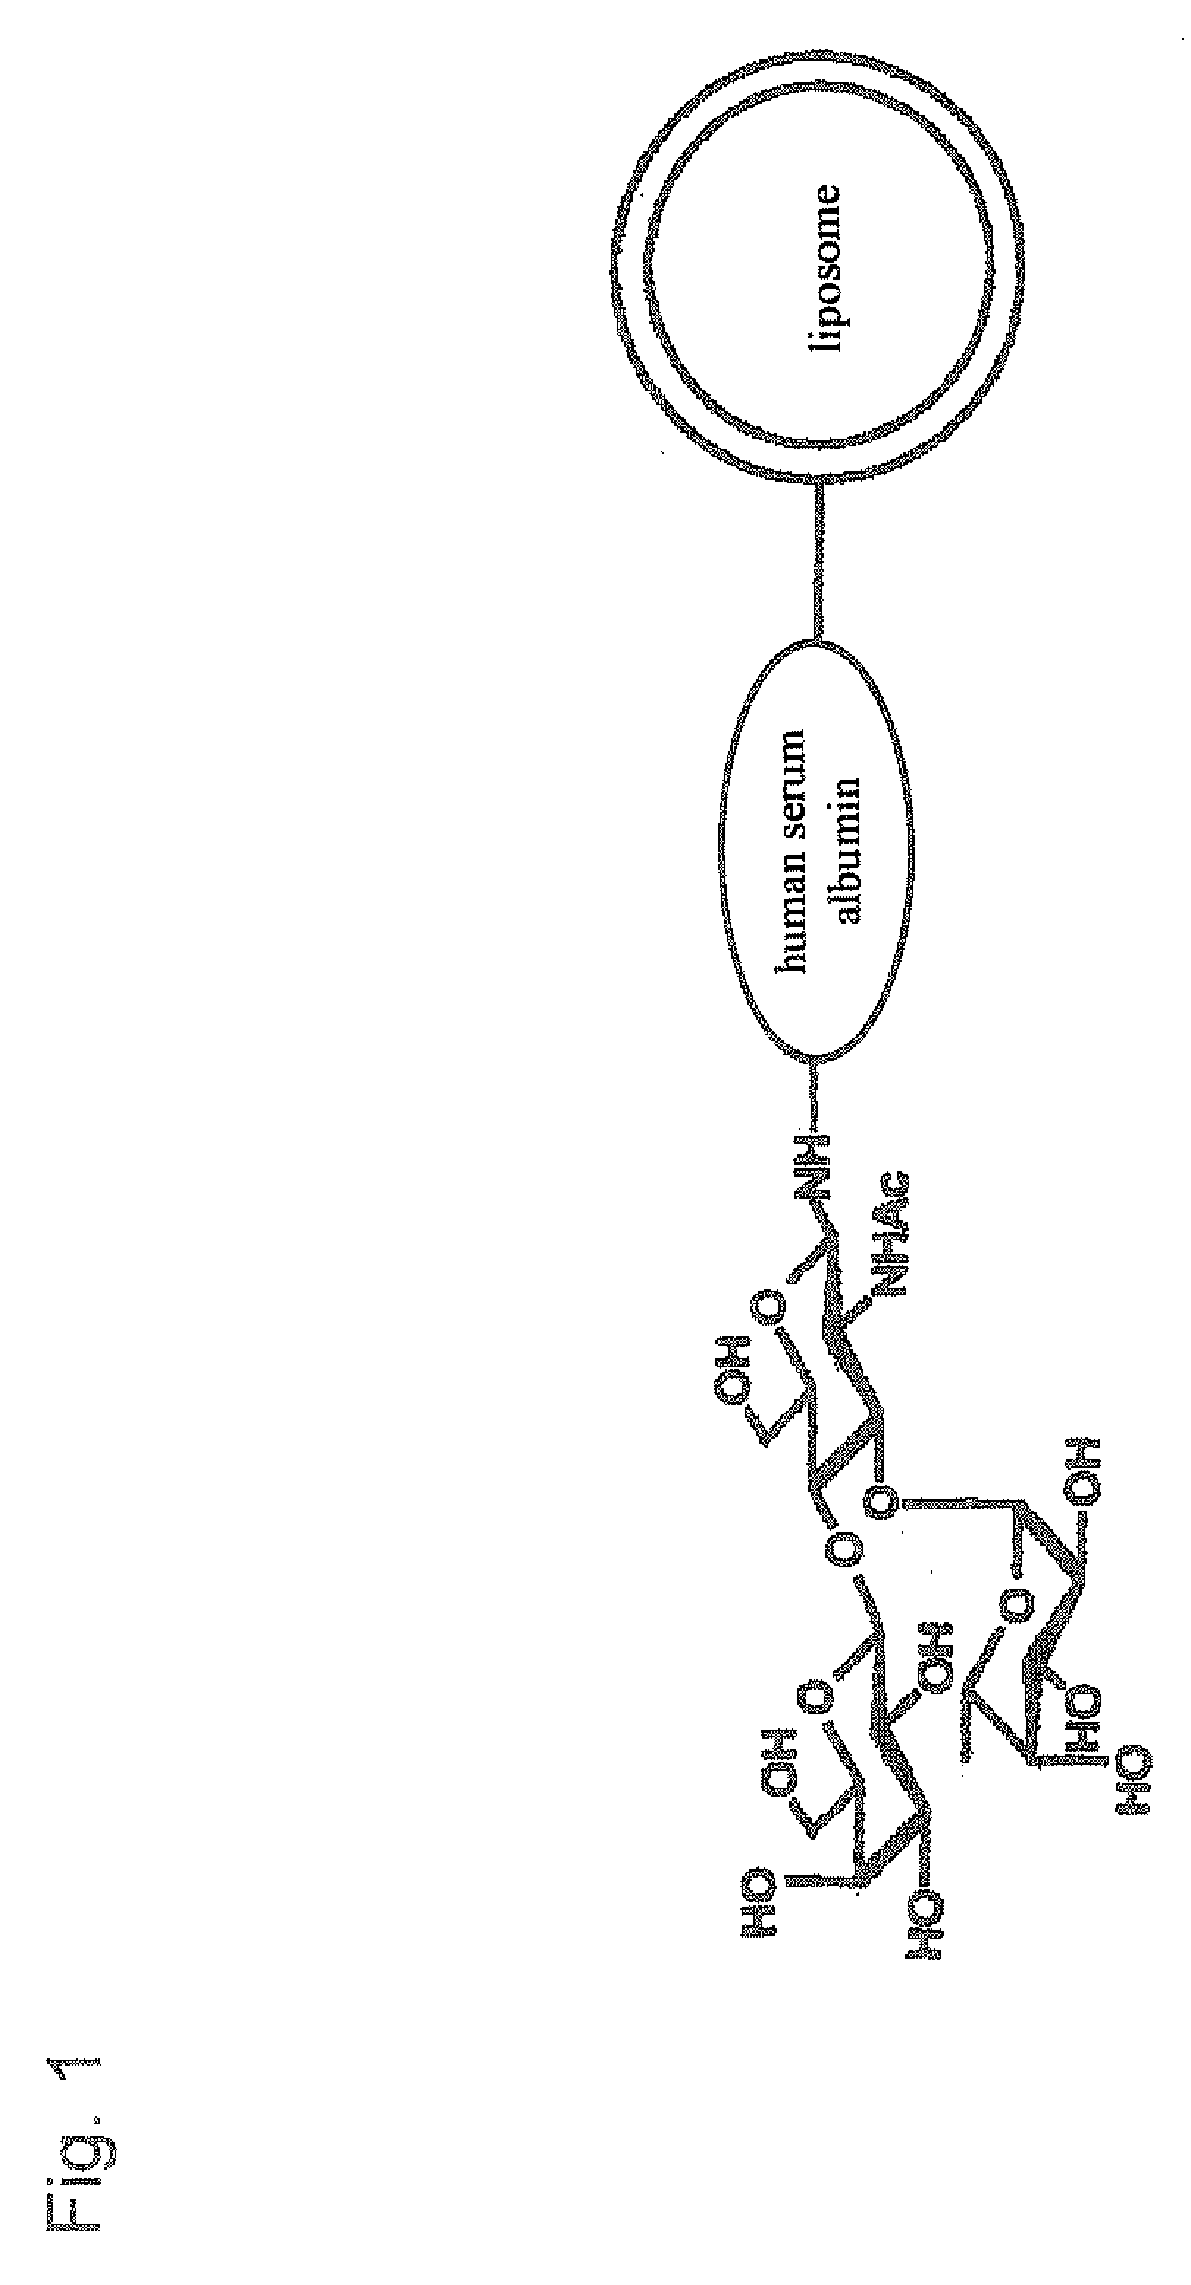 Therapeutic or Diagnostic Drug for Inflammatory Disease Comprising Targeting Liposome